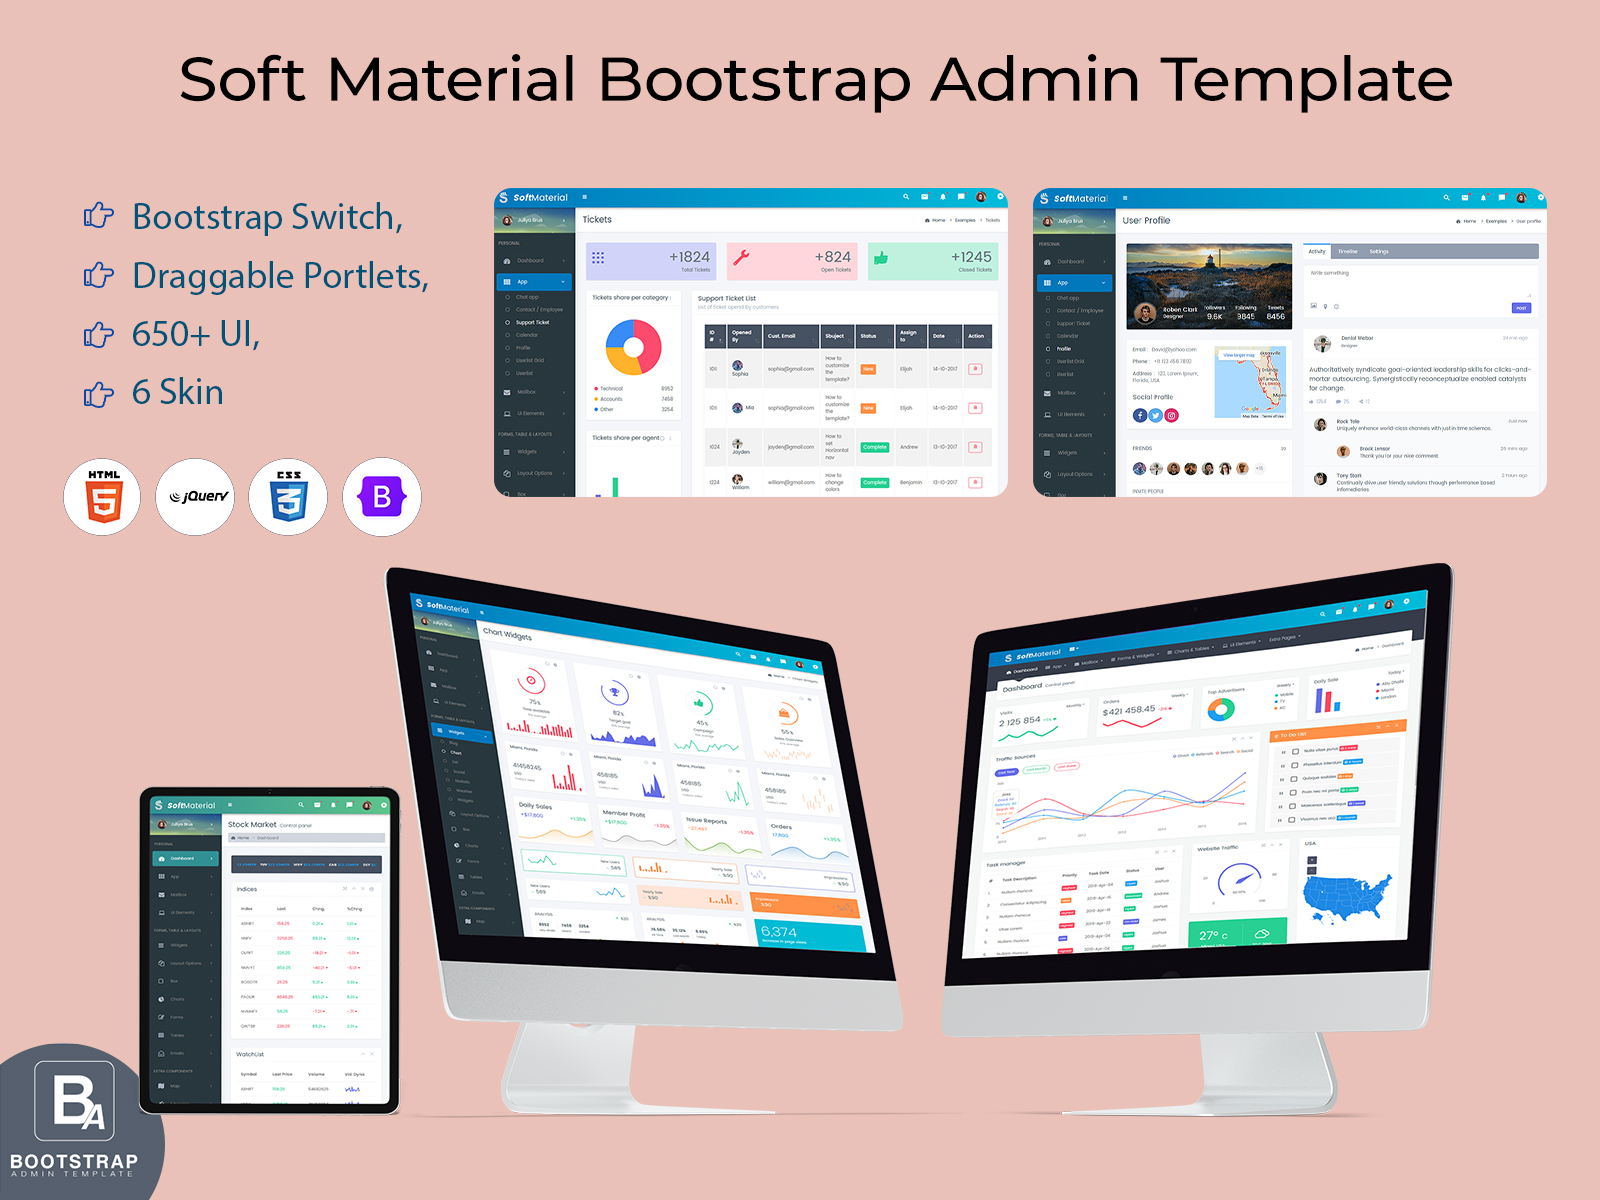 Soft Material Bootstrap Admin Template (11)